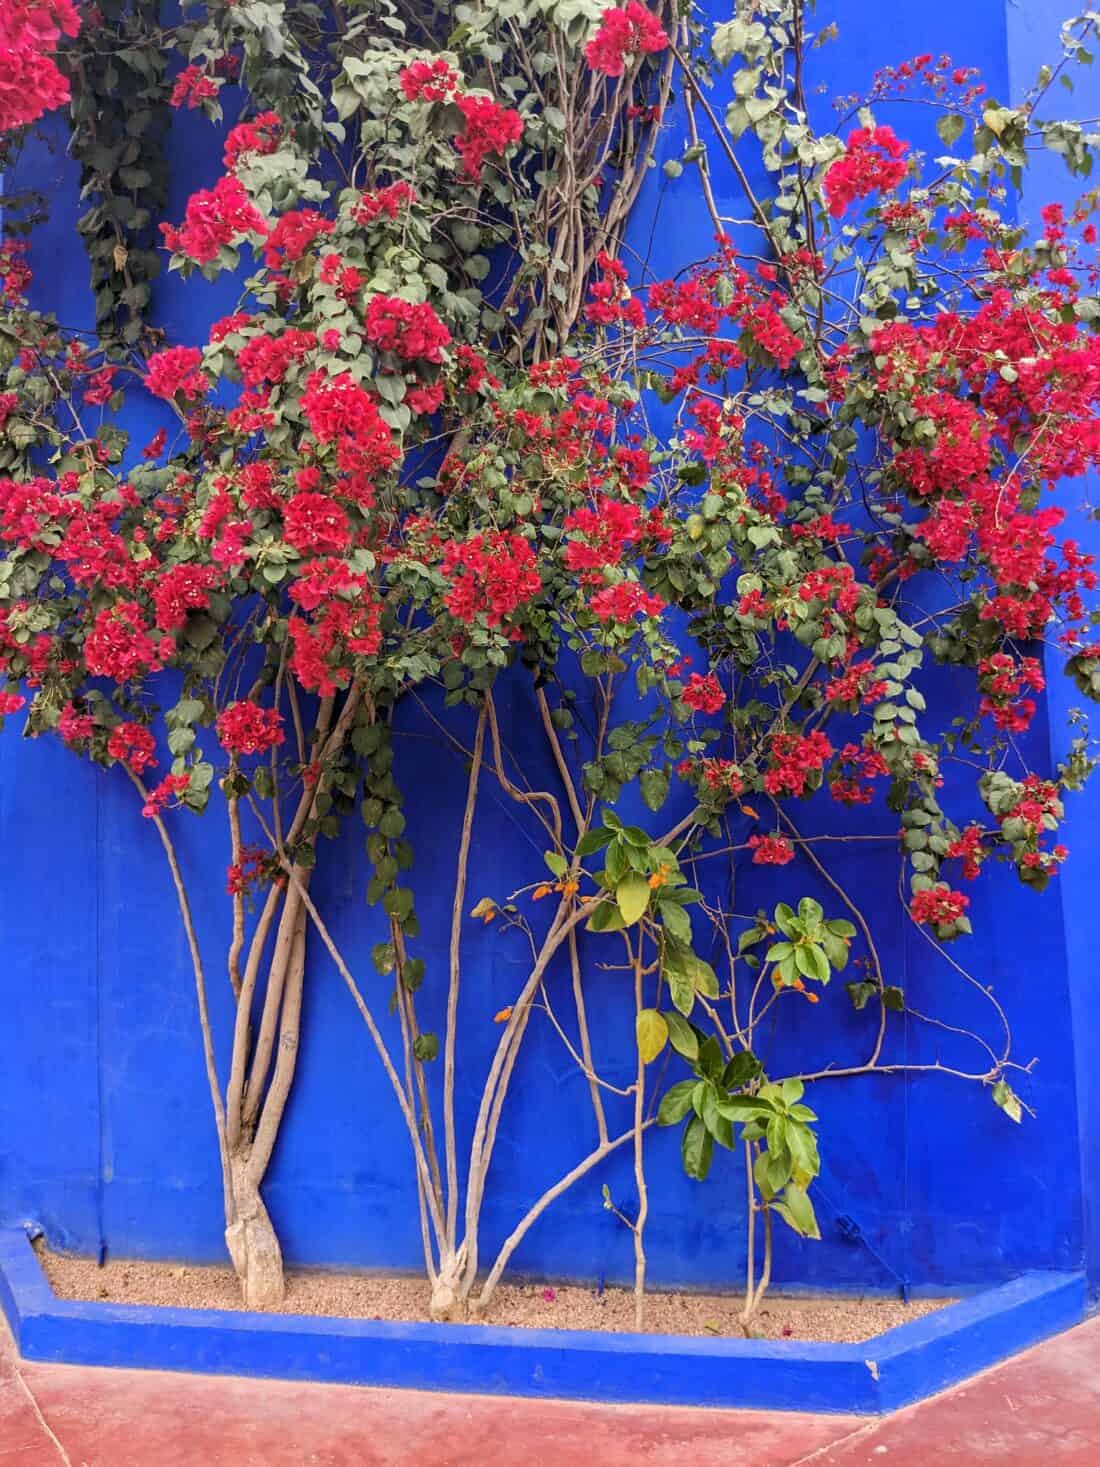 Vibrant red flowers cascading over a bold blue wall.